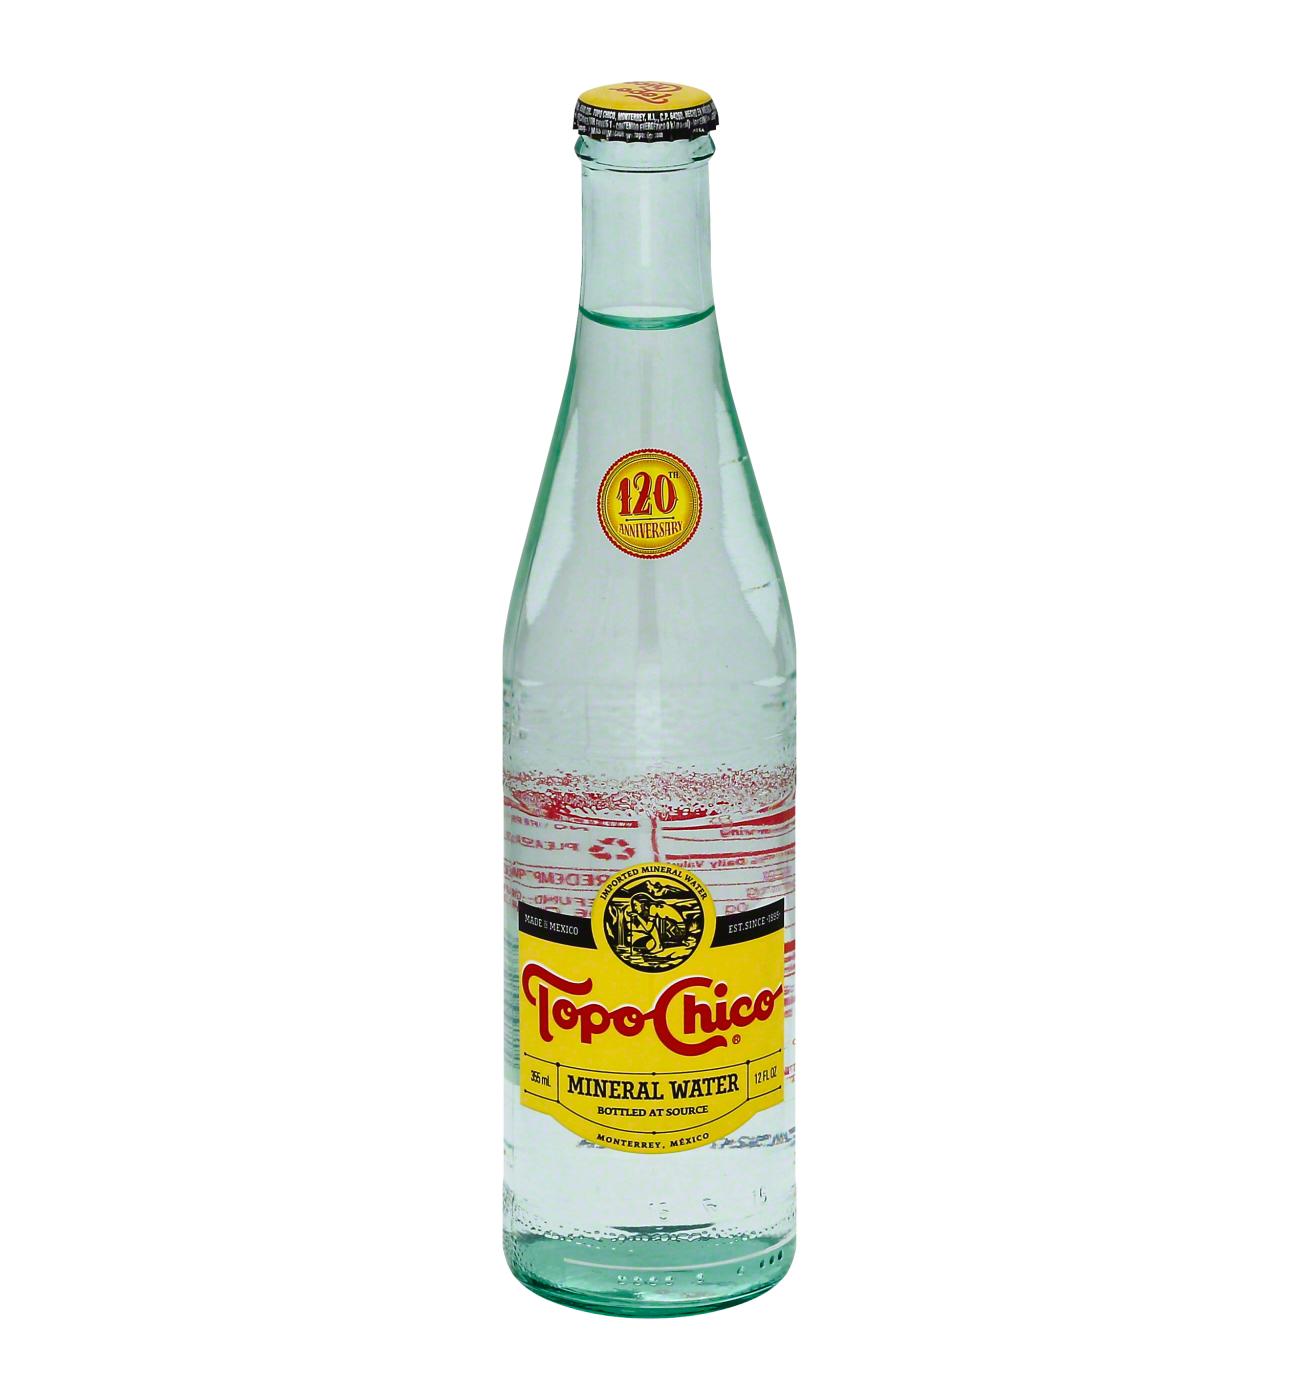 Topo Chico Sparkling Mineral Water; image 2 of 2